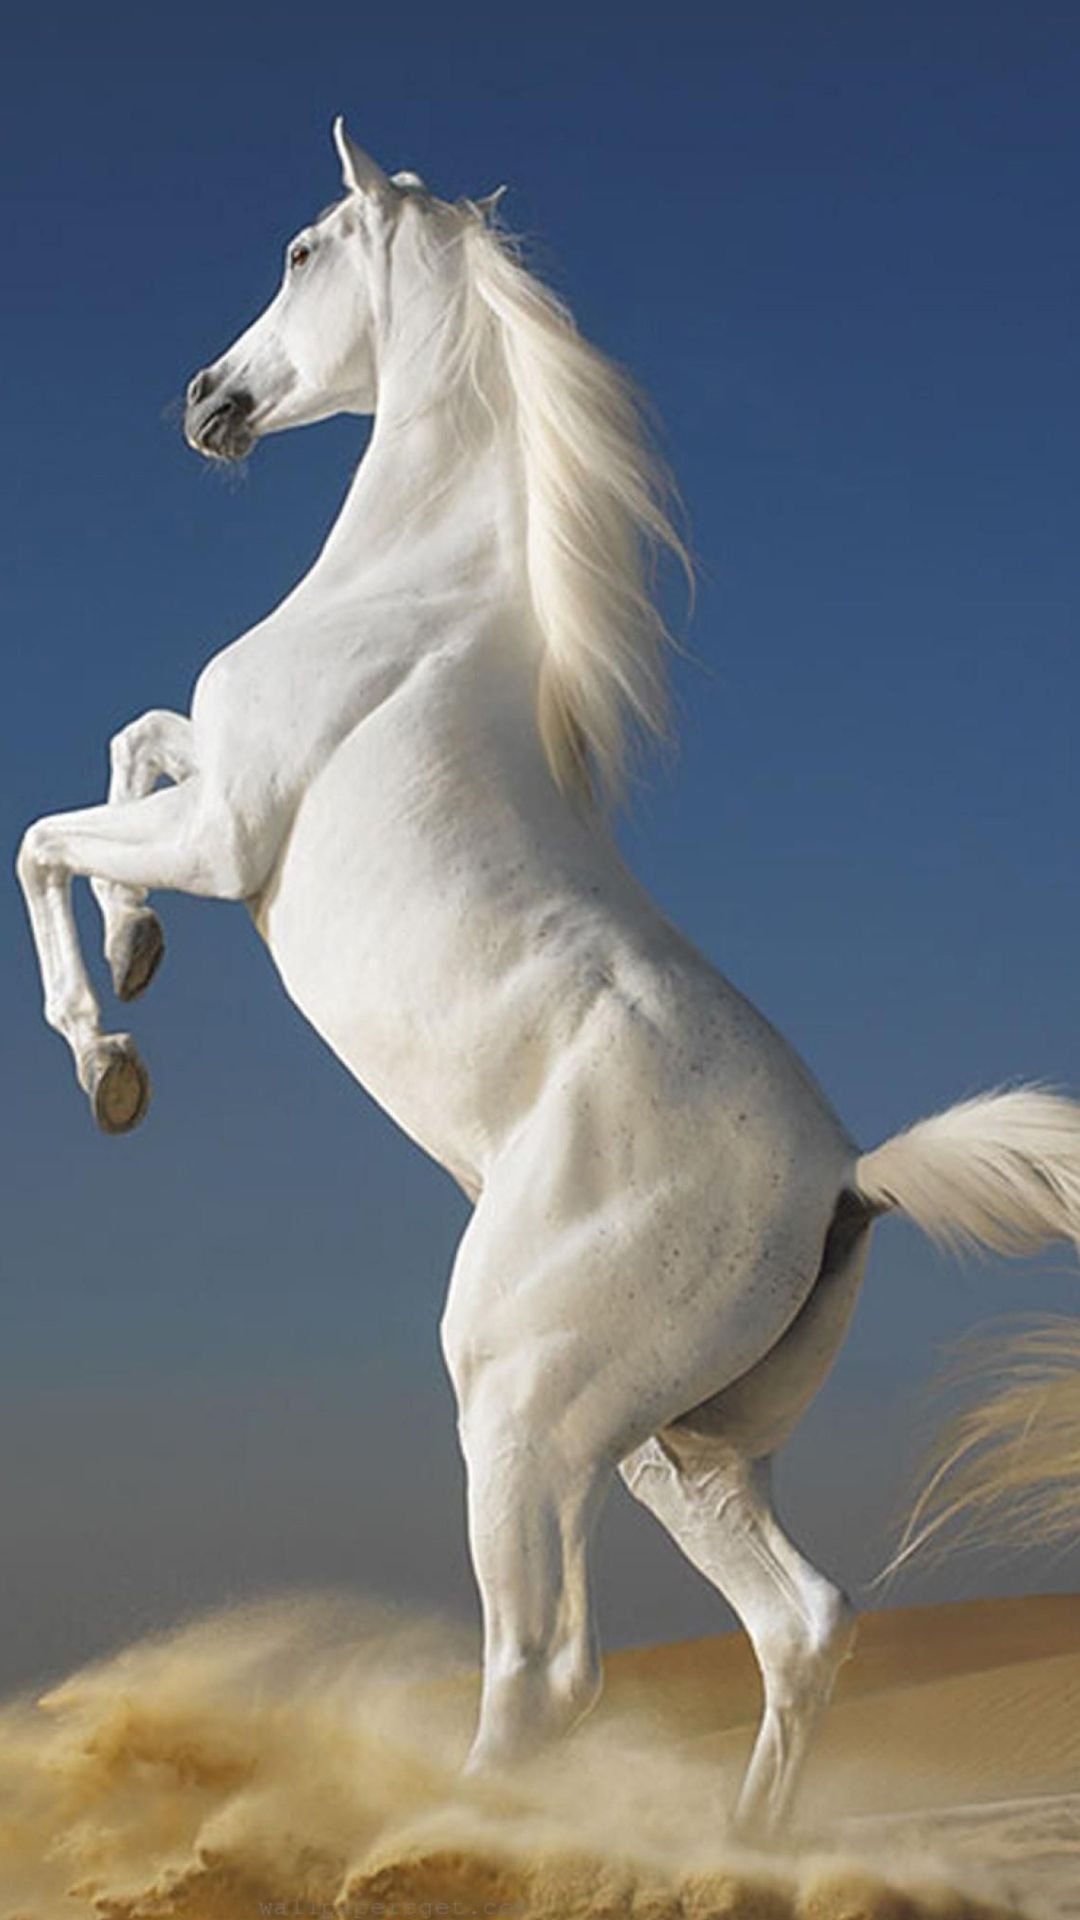 Horse: A majestic animal that embodies the spiritual power of independence, freedom, nobleness. 1080x1920 Full HD Background.